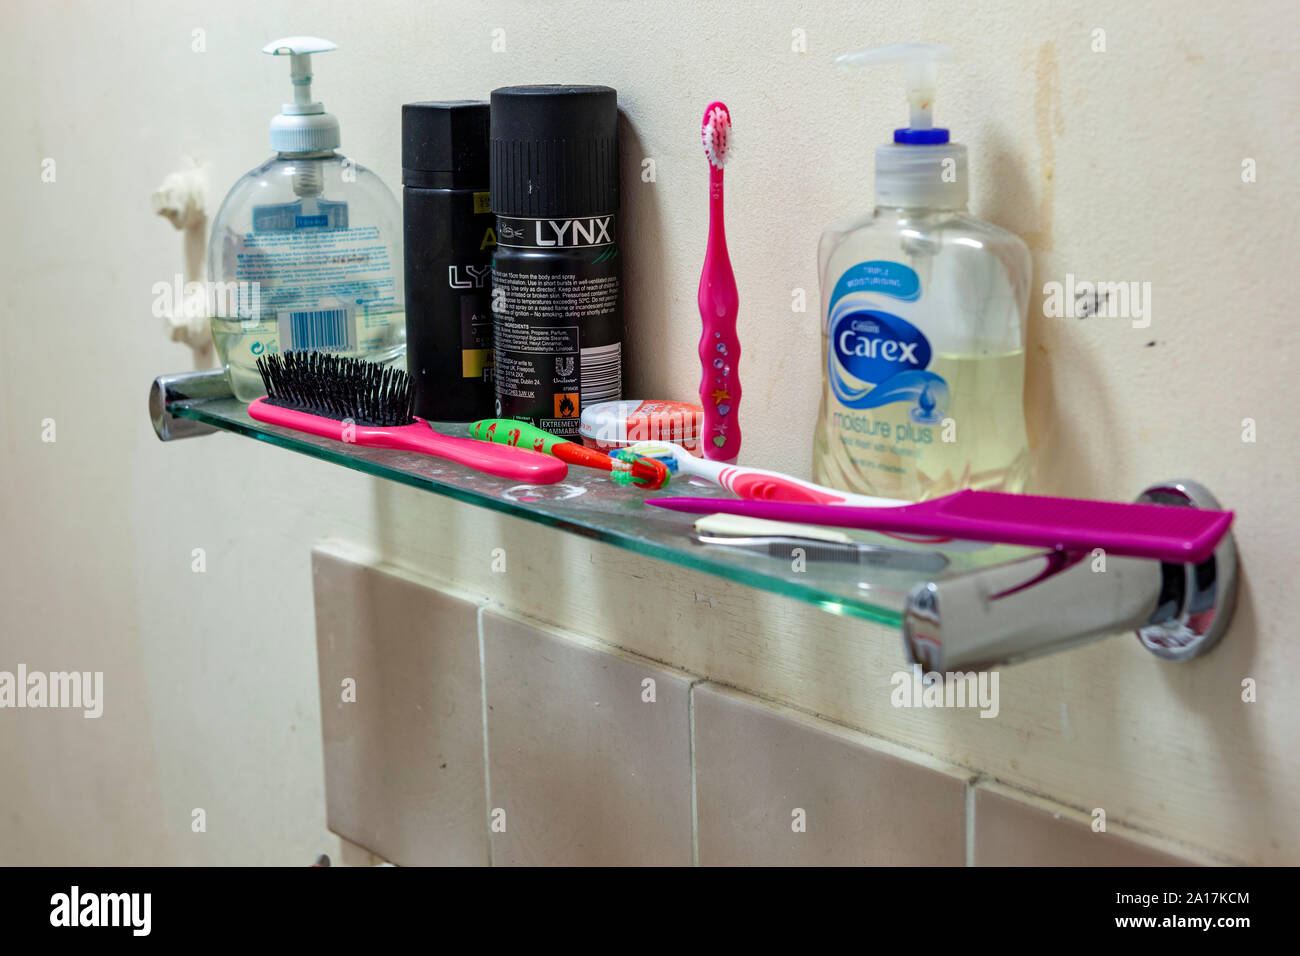 WELWYN GARDEN CITY, UK - SEPTEMBER 23, 2019: Messy bathroom shelf with tooth brushes and soap Stock Photo